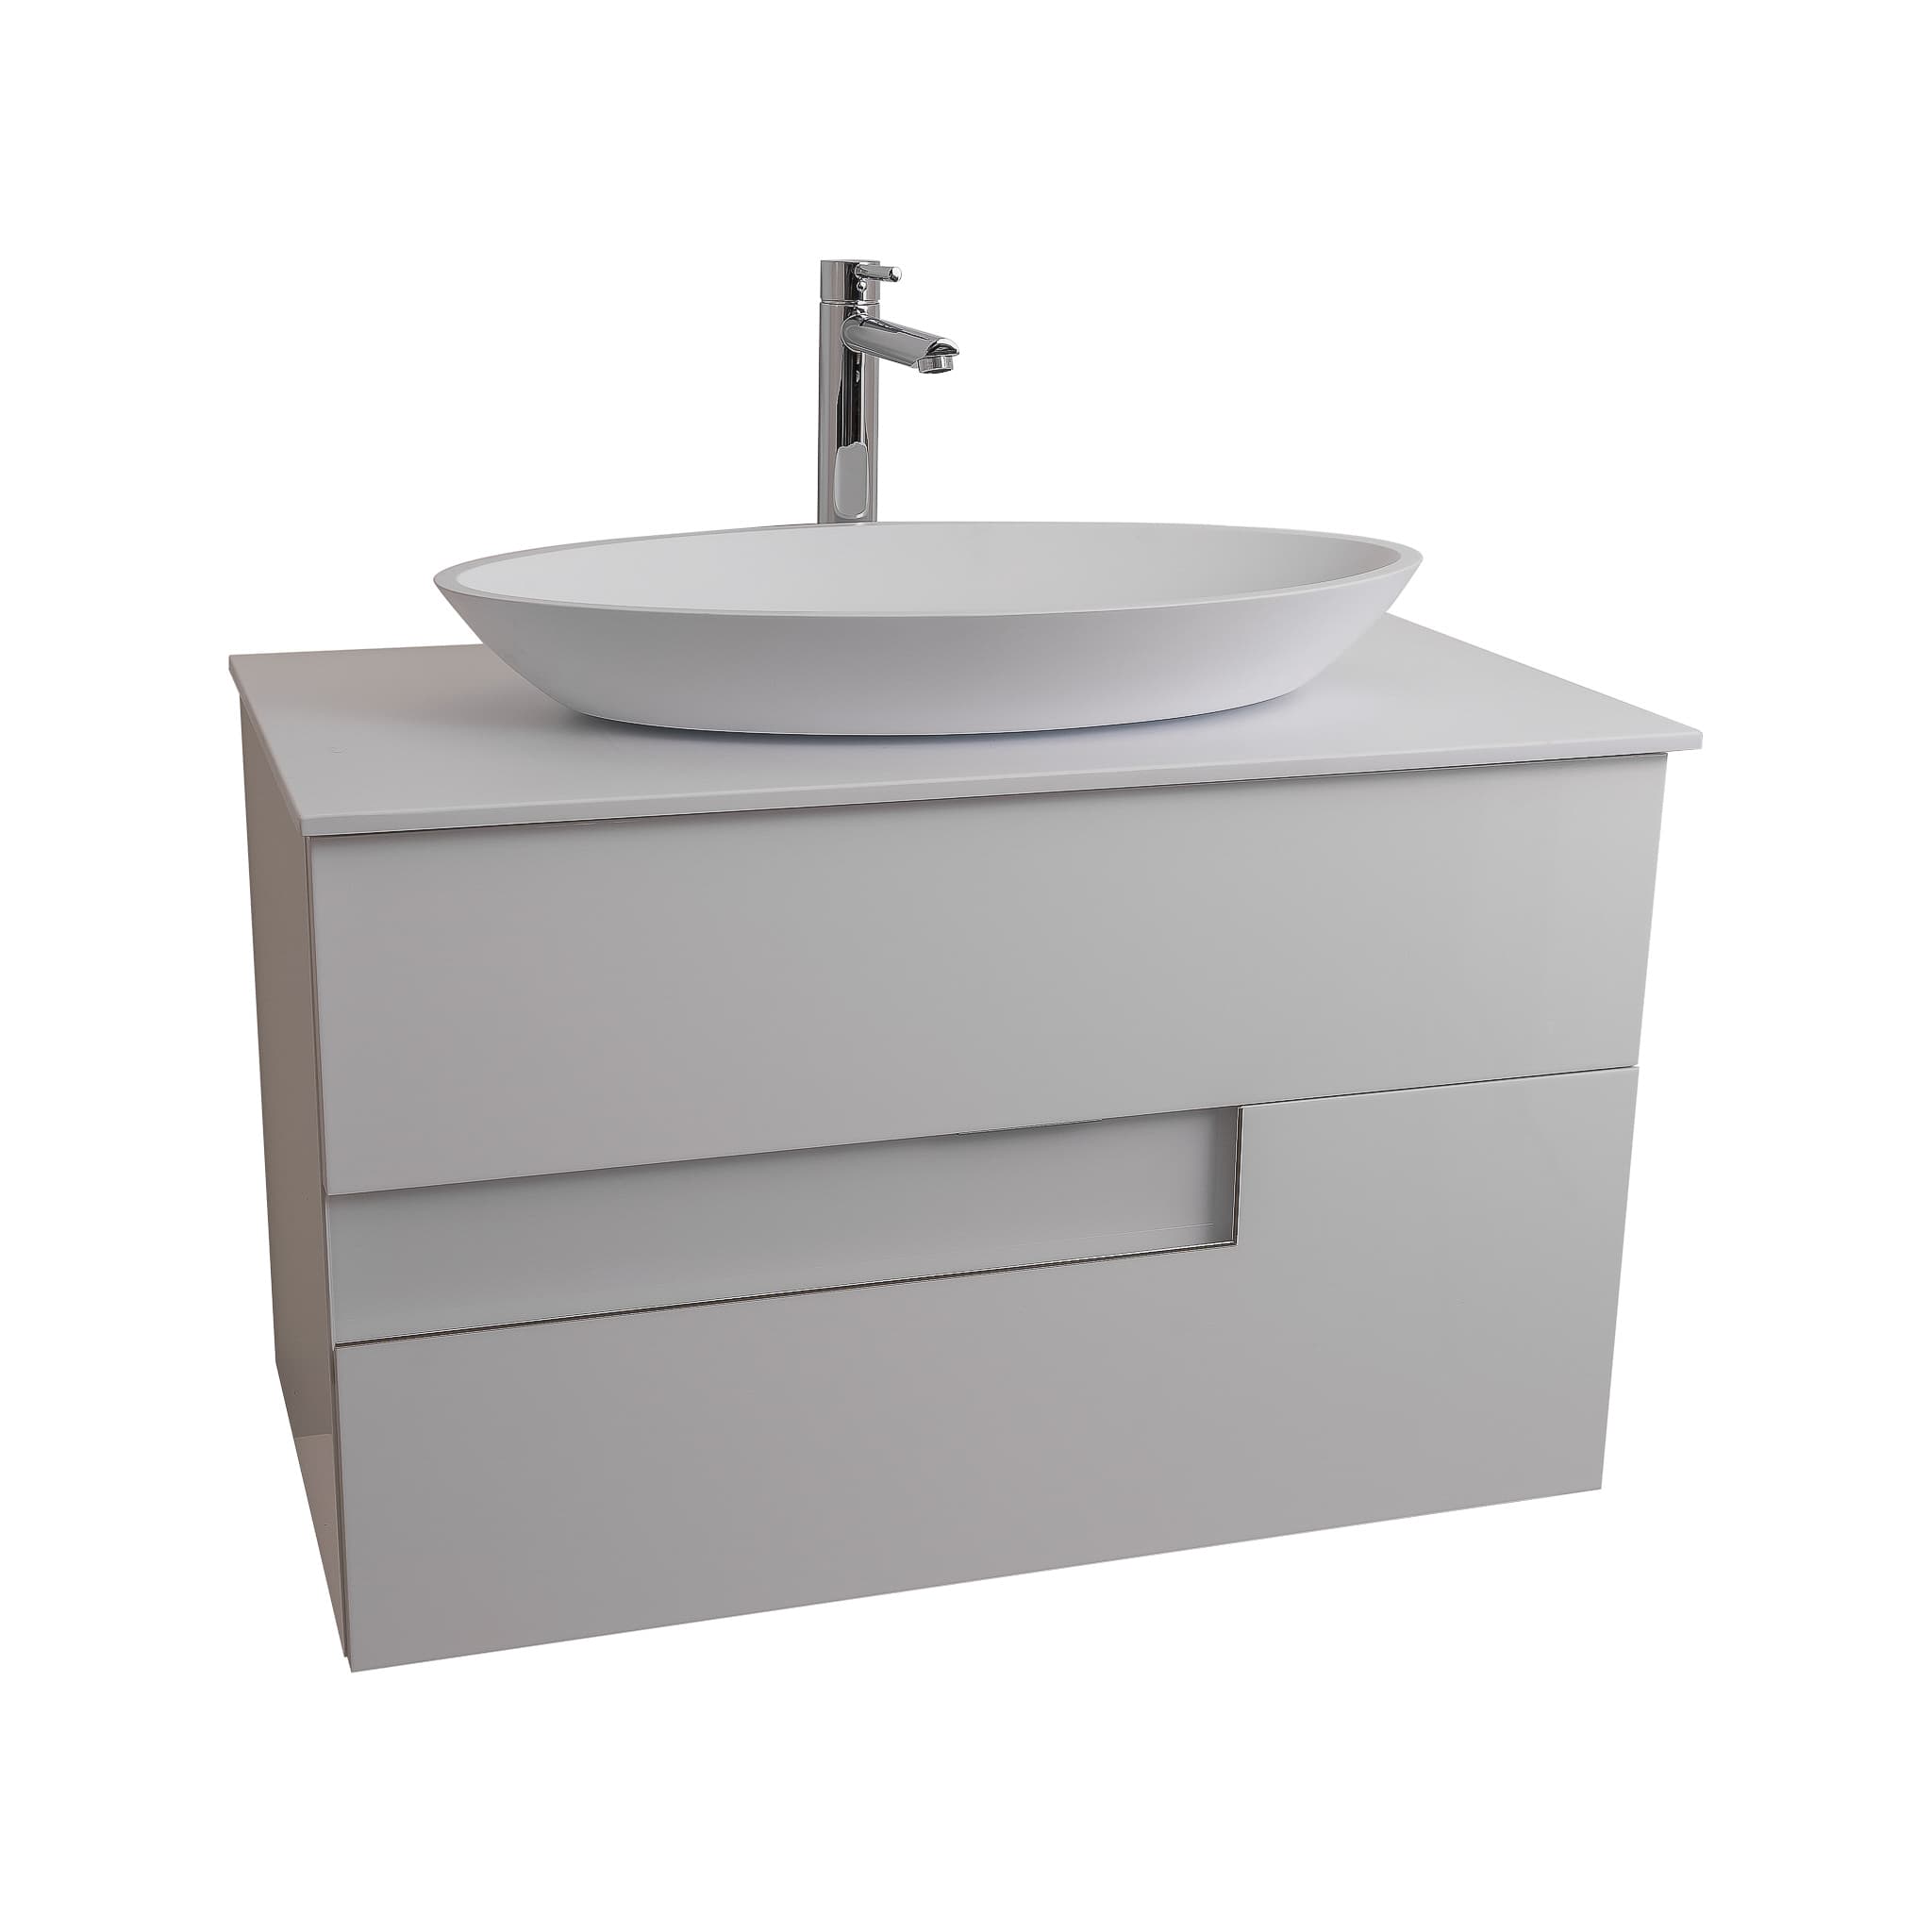 Vision 35.5 White High Gloss Cabinet, Solid Surface Flat White Counter And Oval Solid Surface White Basin 1305, Wall Mounted Modern Vanity Set